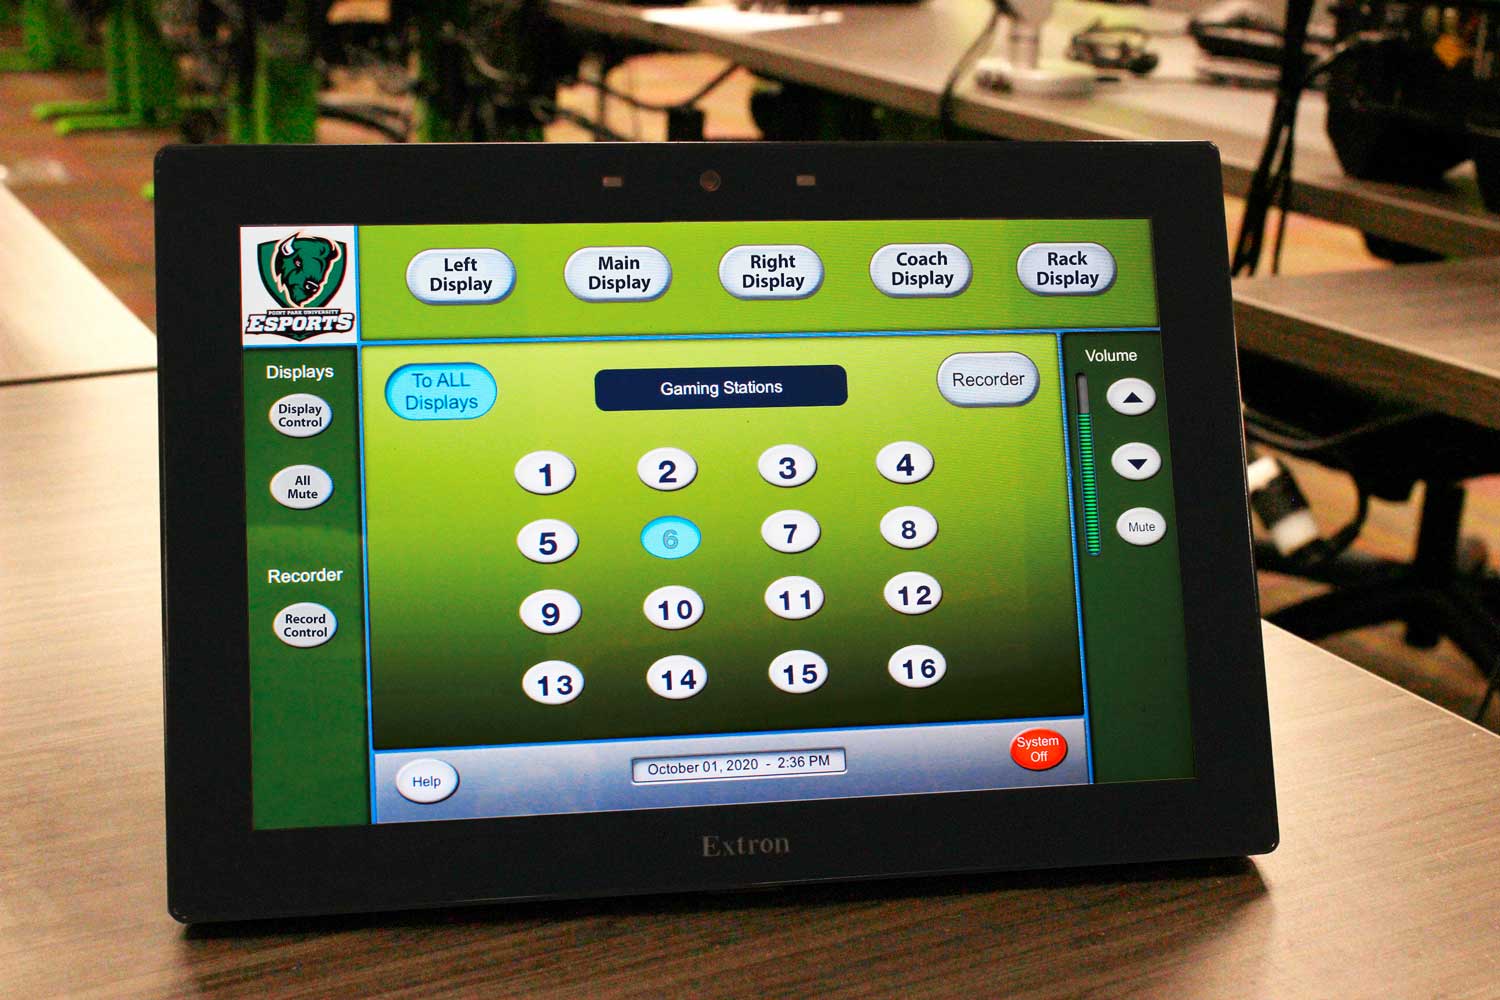 Coach Gaul controls the XTP system using the TLP Pro 1025T 10” Tabletop TouchLink Pro Touchpanel at his workstation.